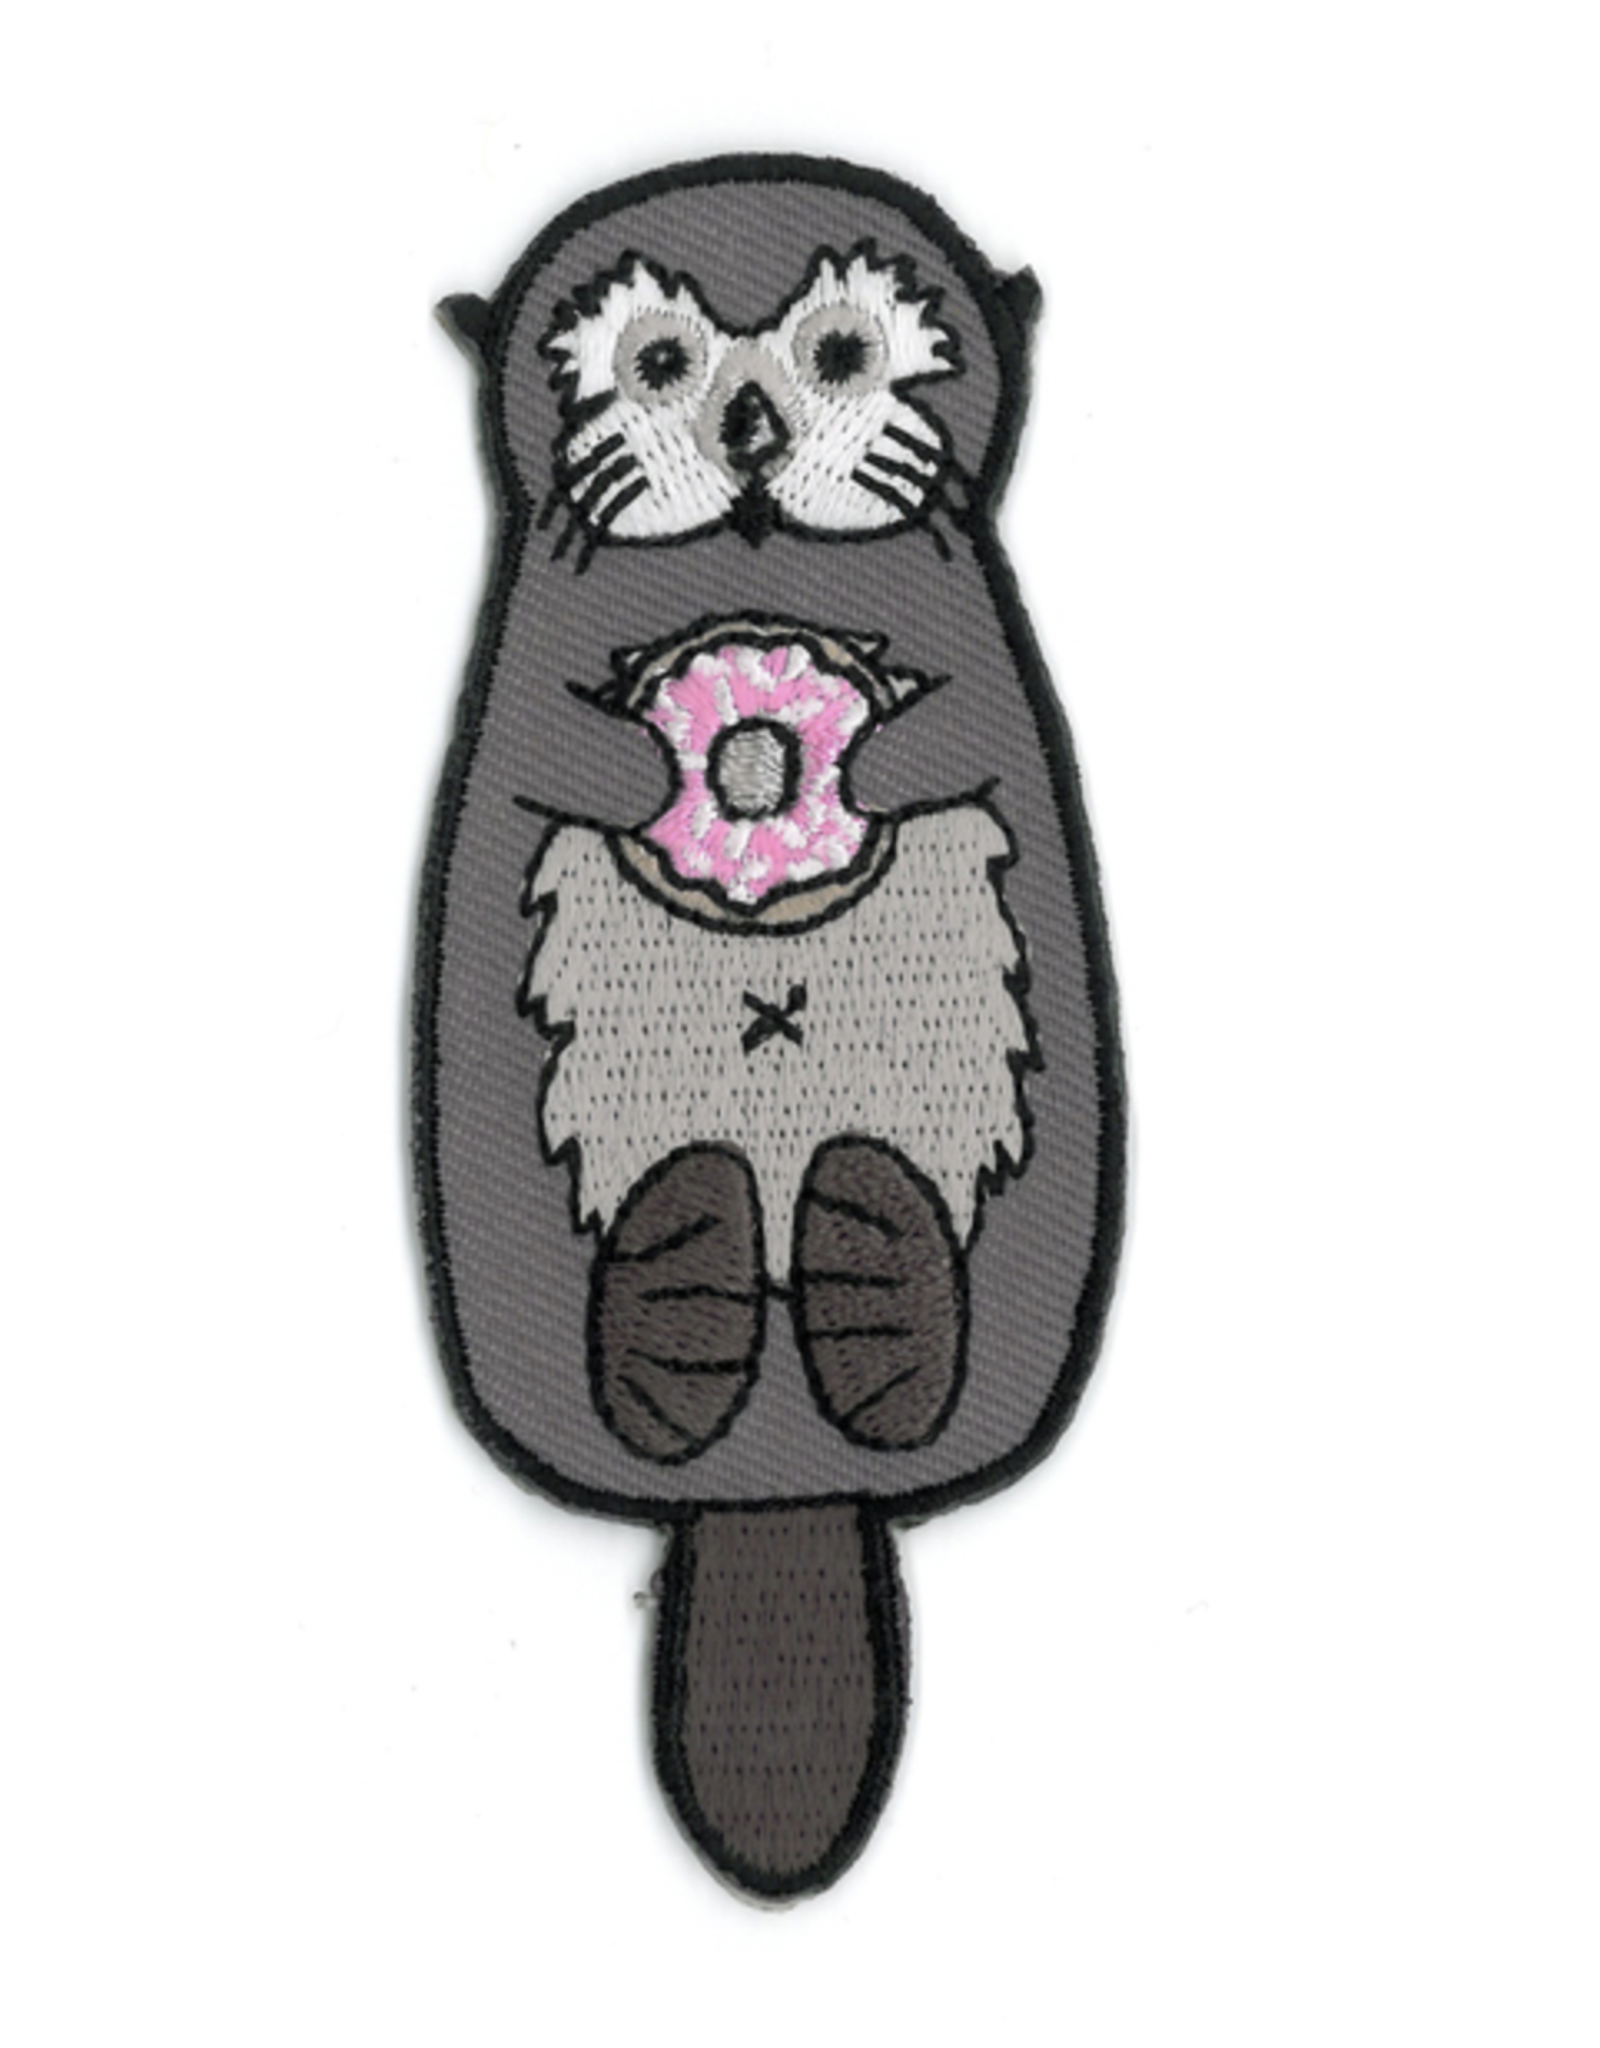 Cali Otter with Donut Patch